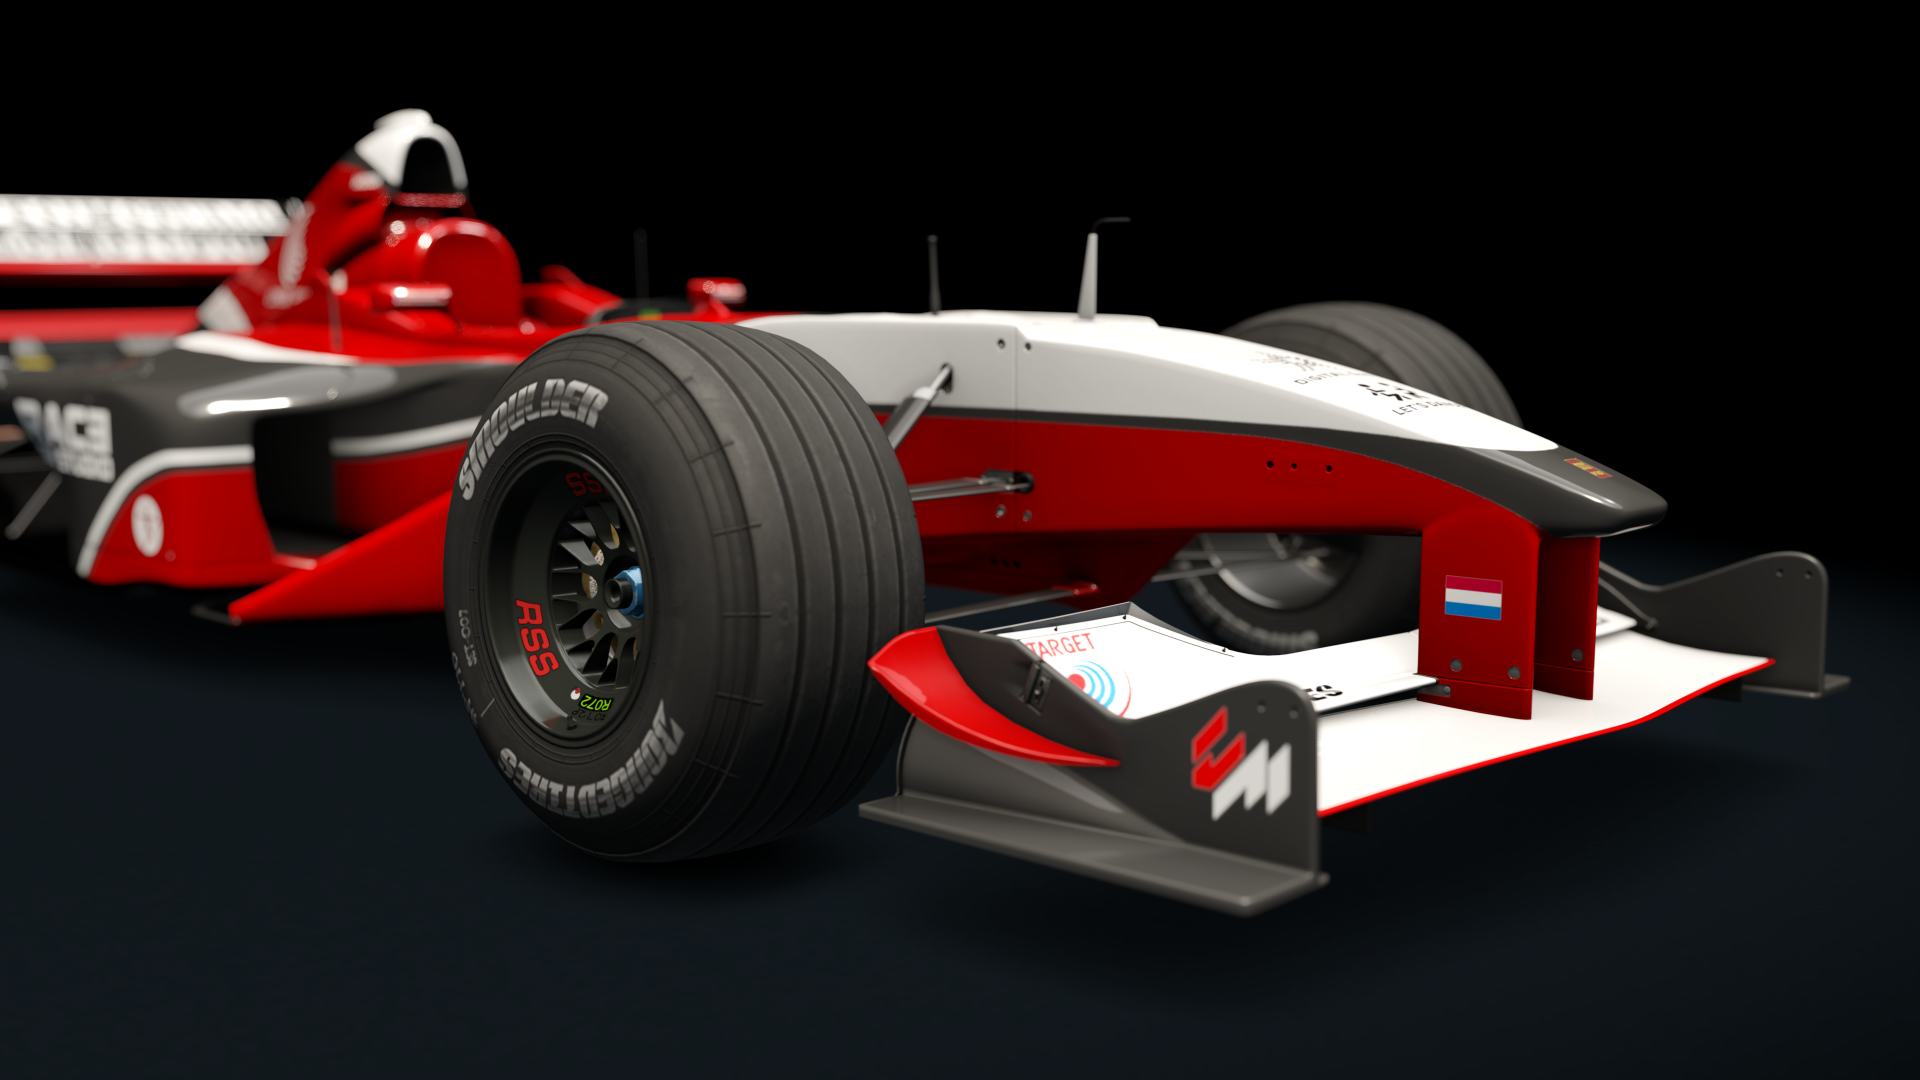 More information about "Assetto Corsa: Formula RSS 2000 V10 by RaceSim Studio"